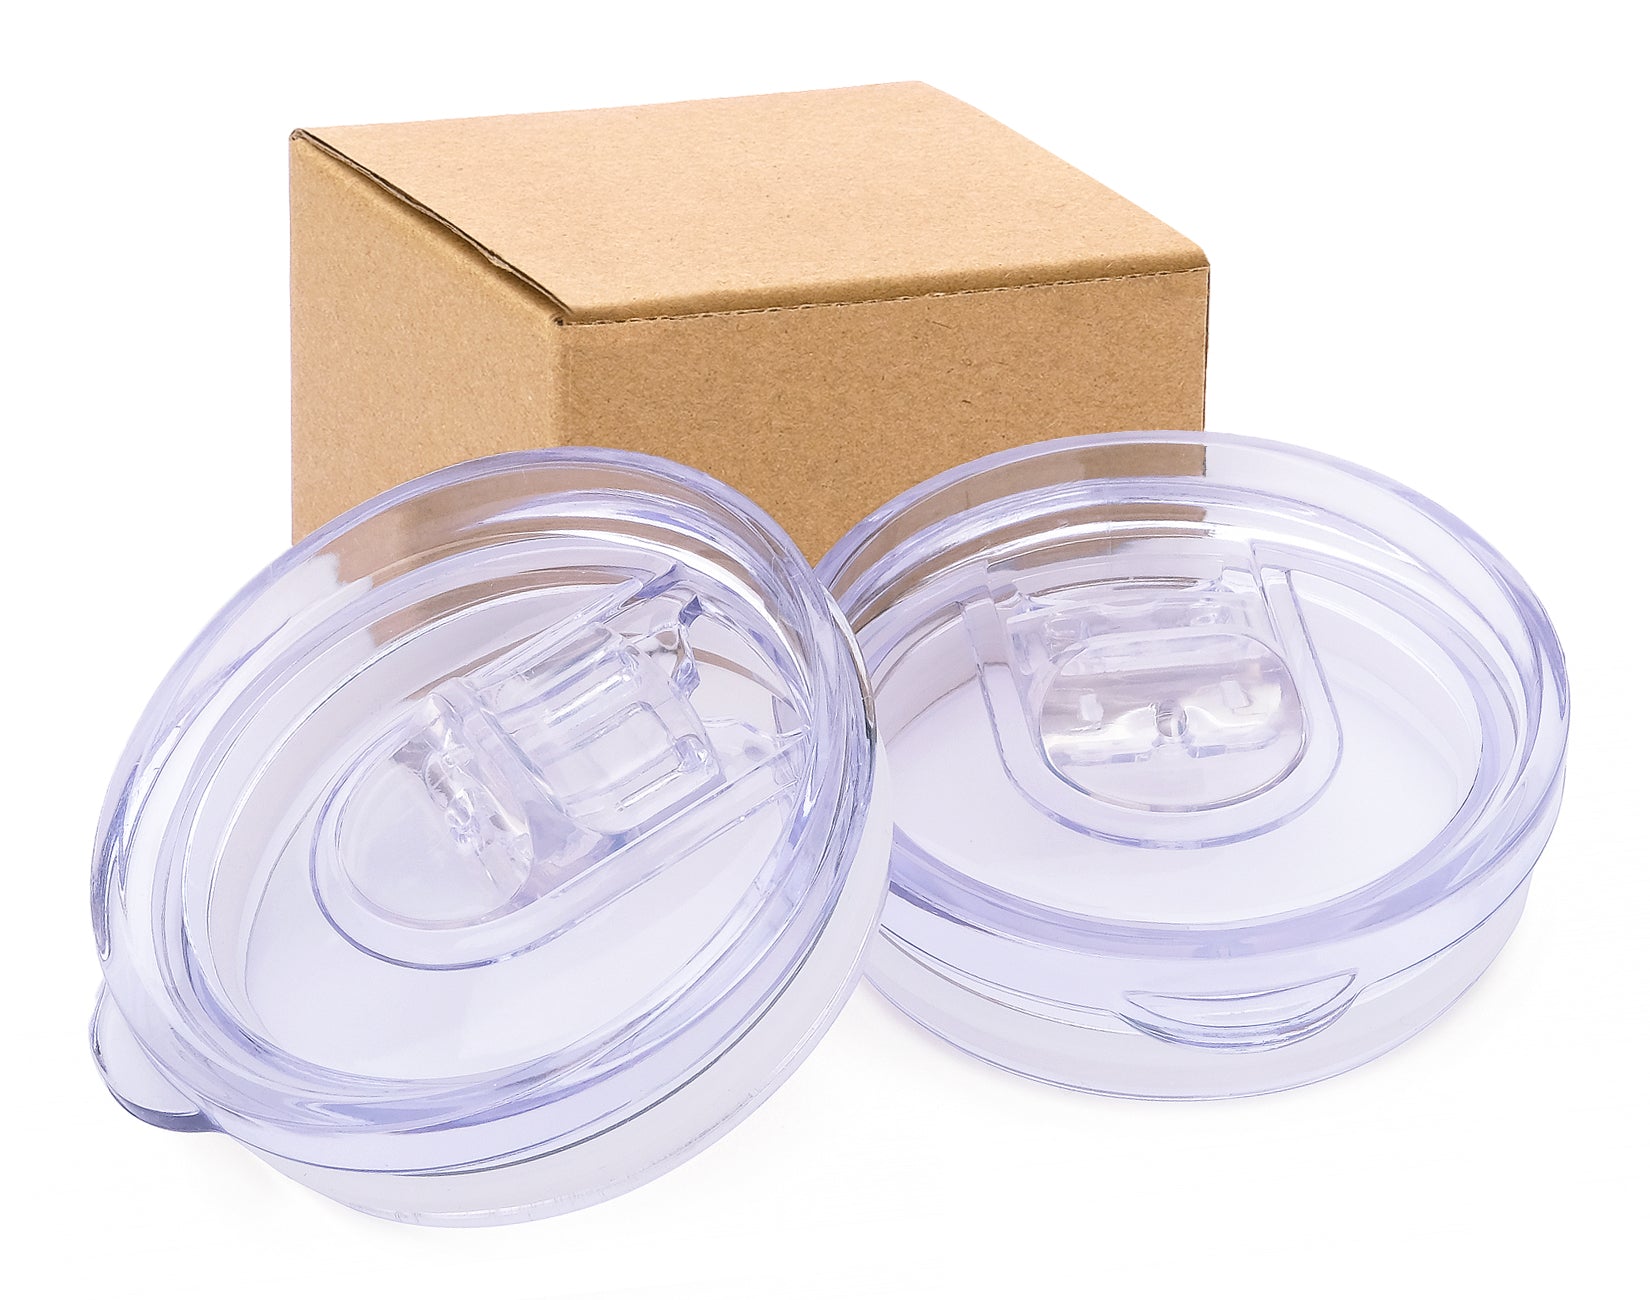 20 Oz Tumbler Replacement Lids, Spill-proof Lids, Cover For 20